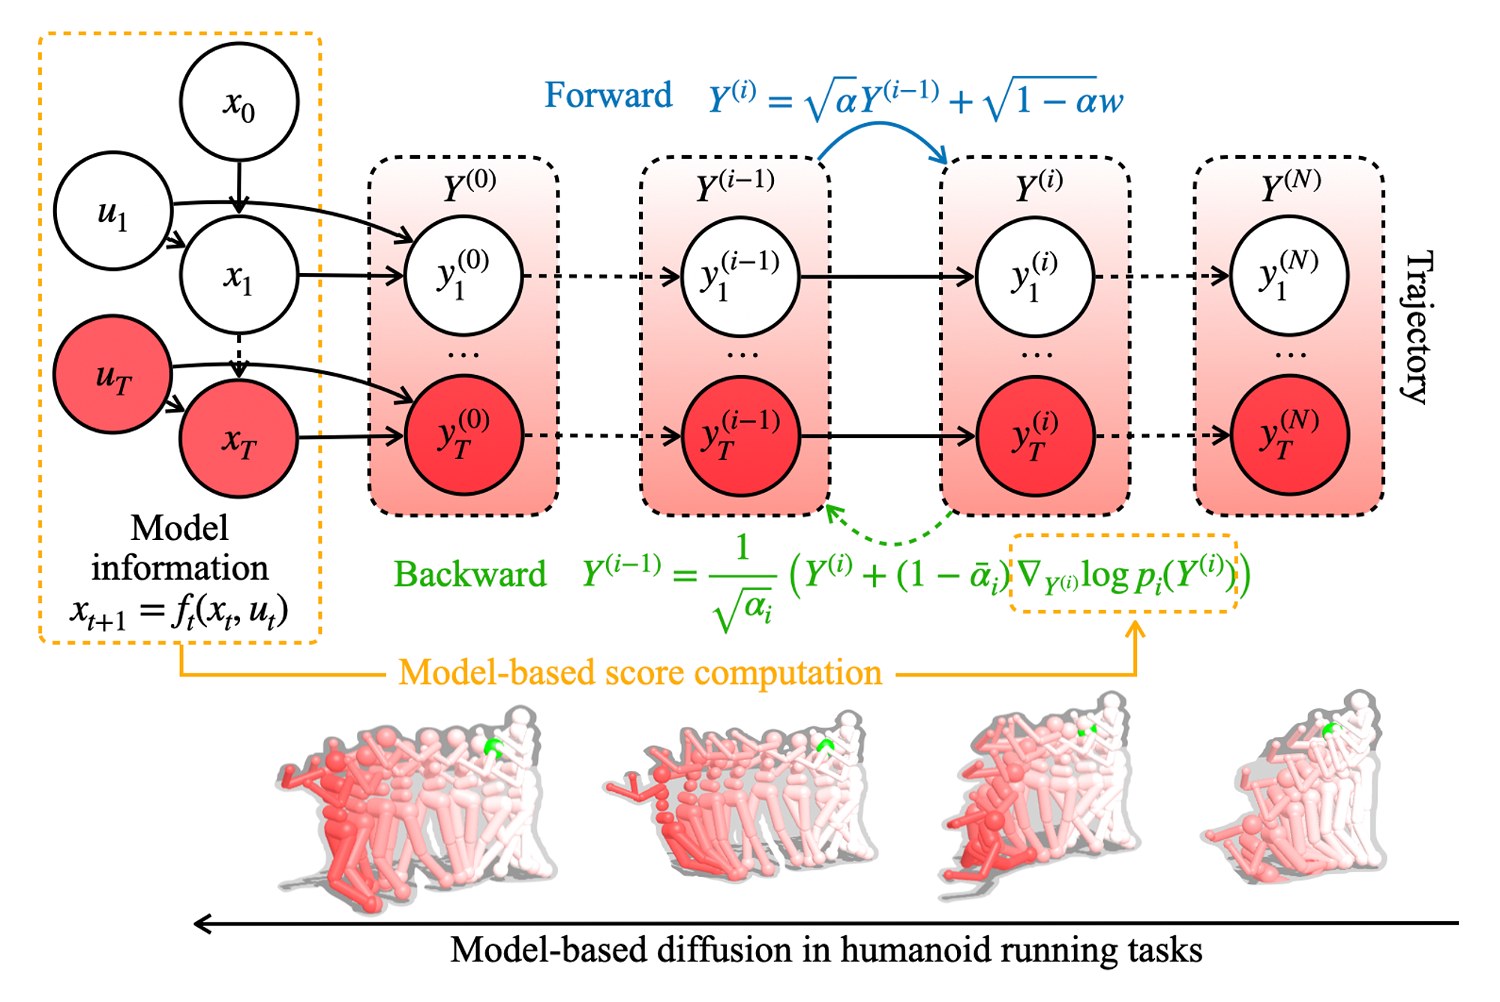 Model-based Diffusion enables flexible trajectory generation without any data.